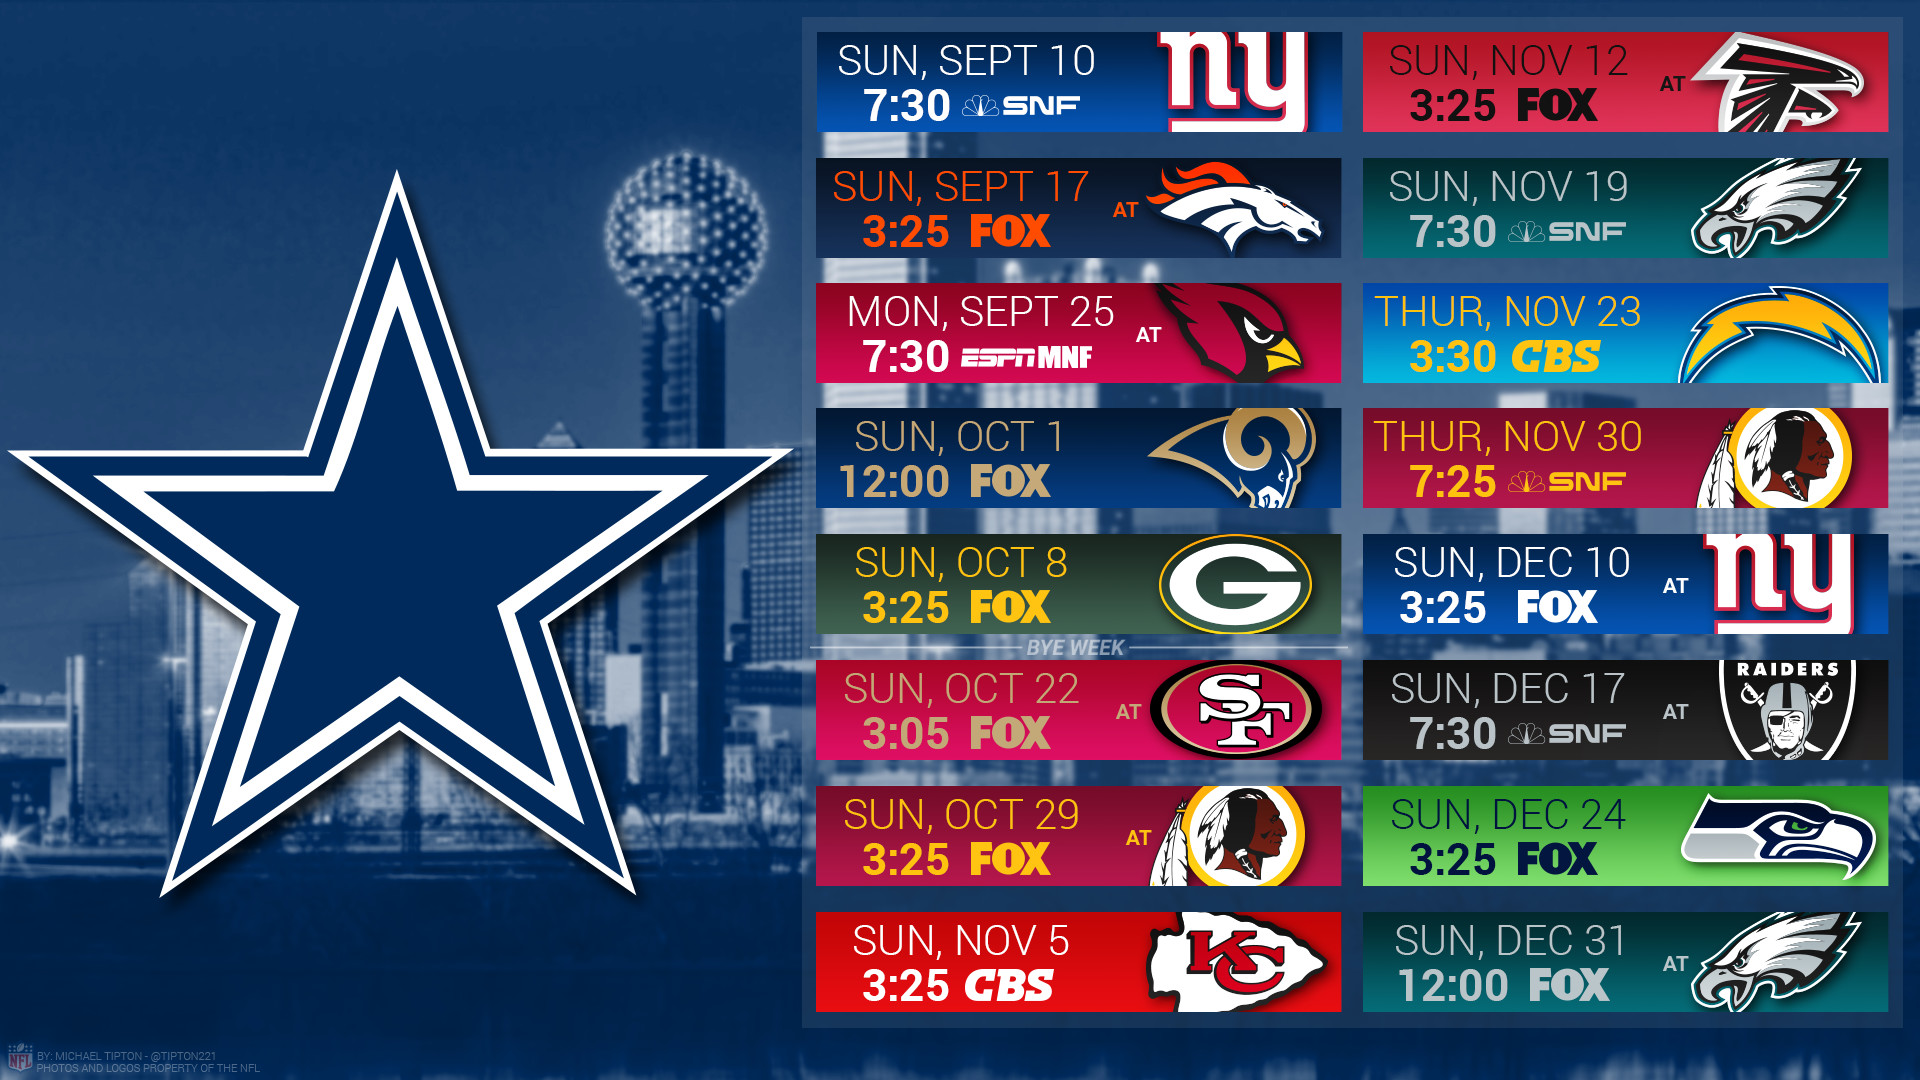 1920x1080 1920 x 1080 pxSideline Events - Providing Tickets and Packages for the  Dallas .... dallas-cowboys-desktop-2017-schedule-wallpaper-city-central.